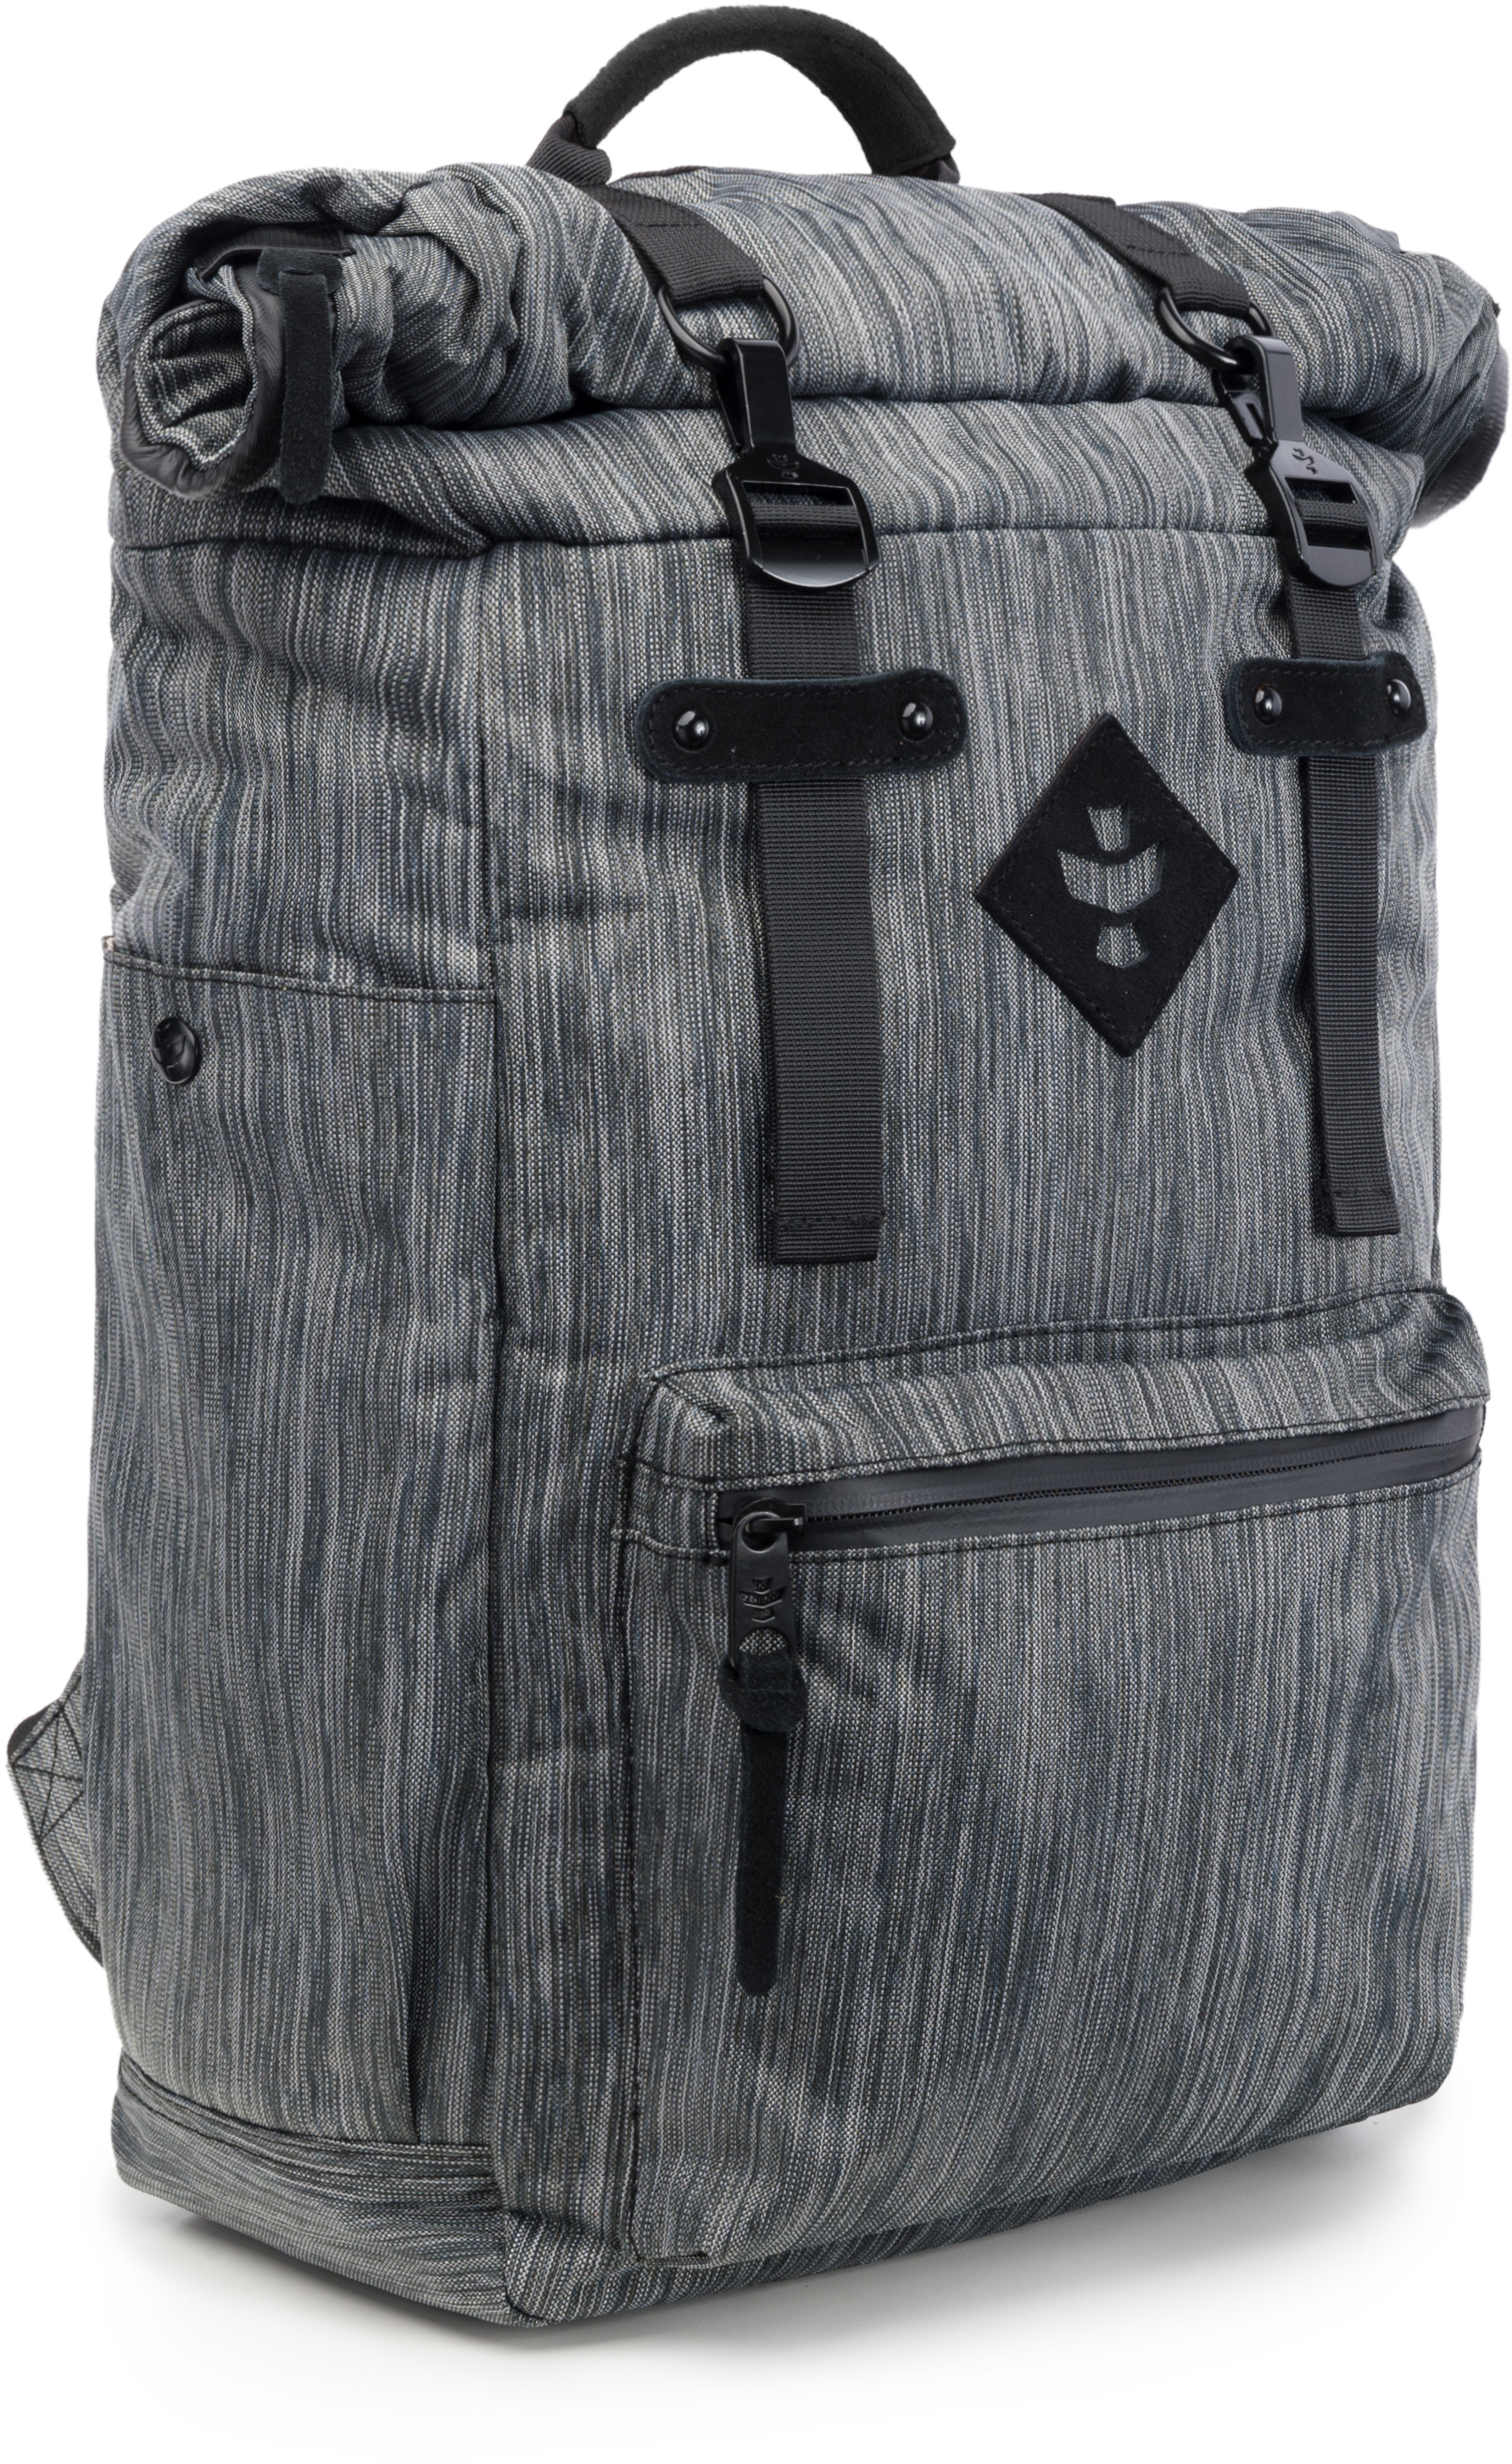 Picture for Revelry Supply The Drifter Rolltop Backpack, Striped Black